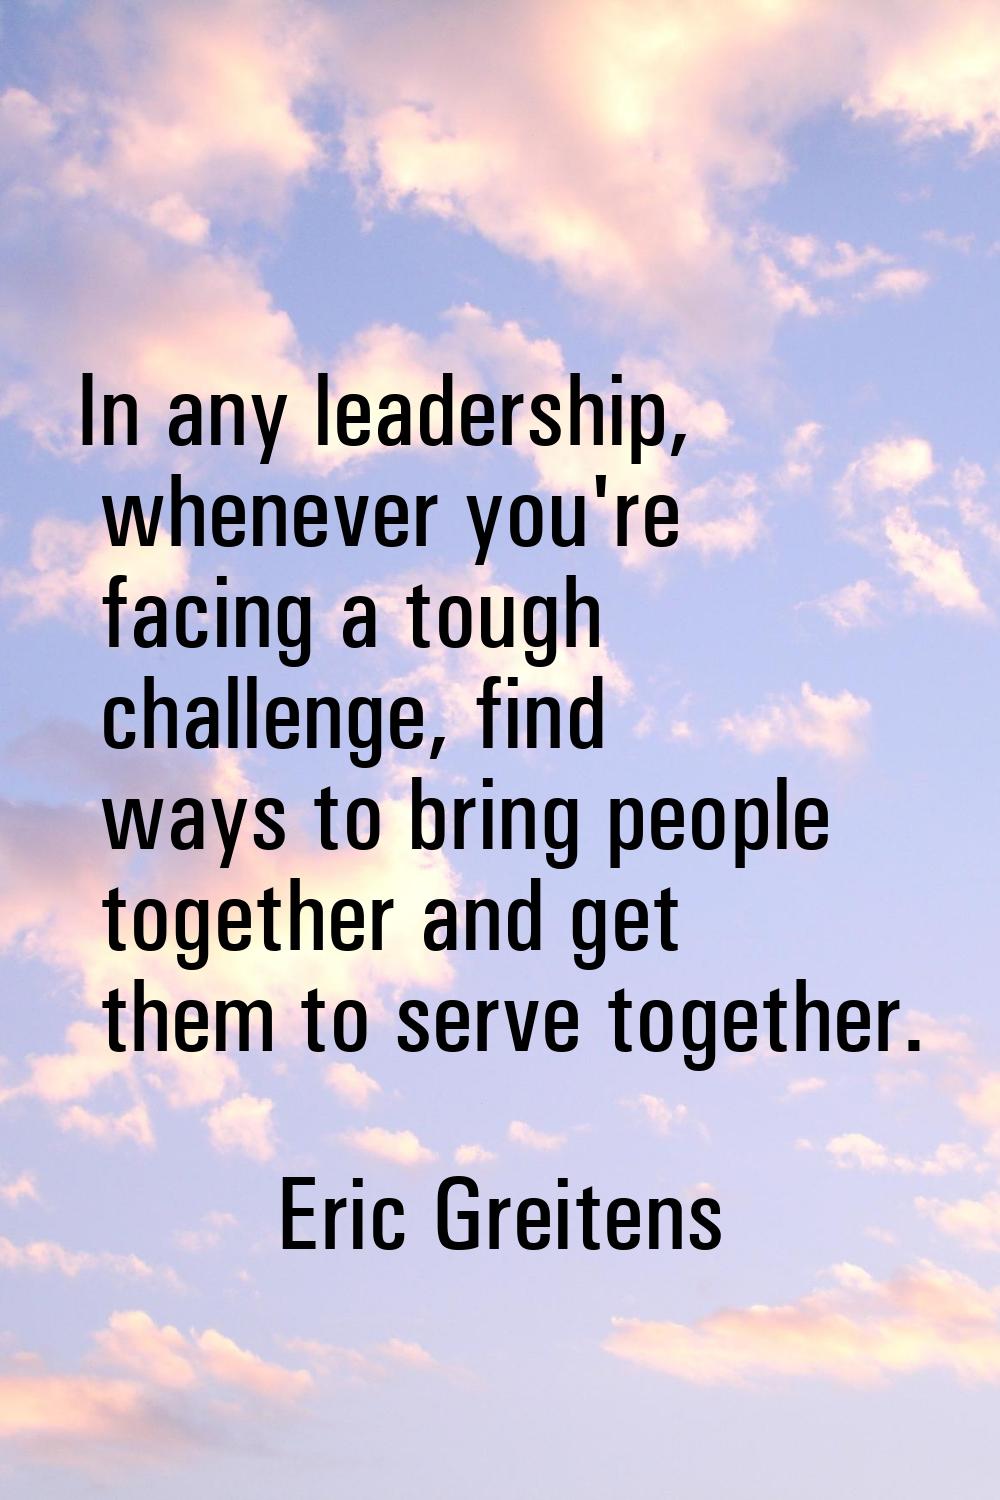 In any leadership, whenever you're facing a tough challenge, find ways to bring people together and